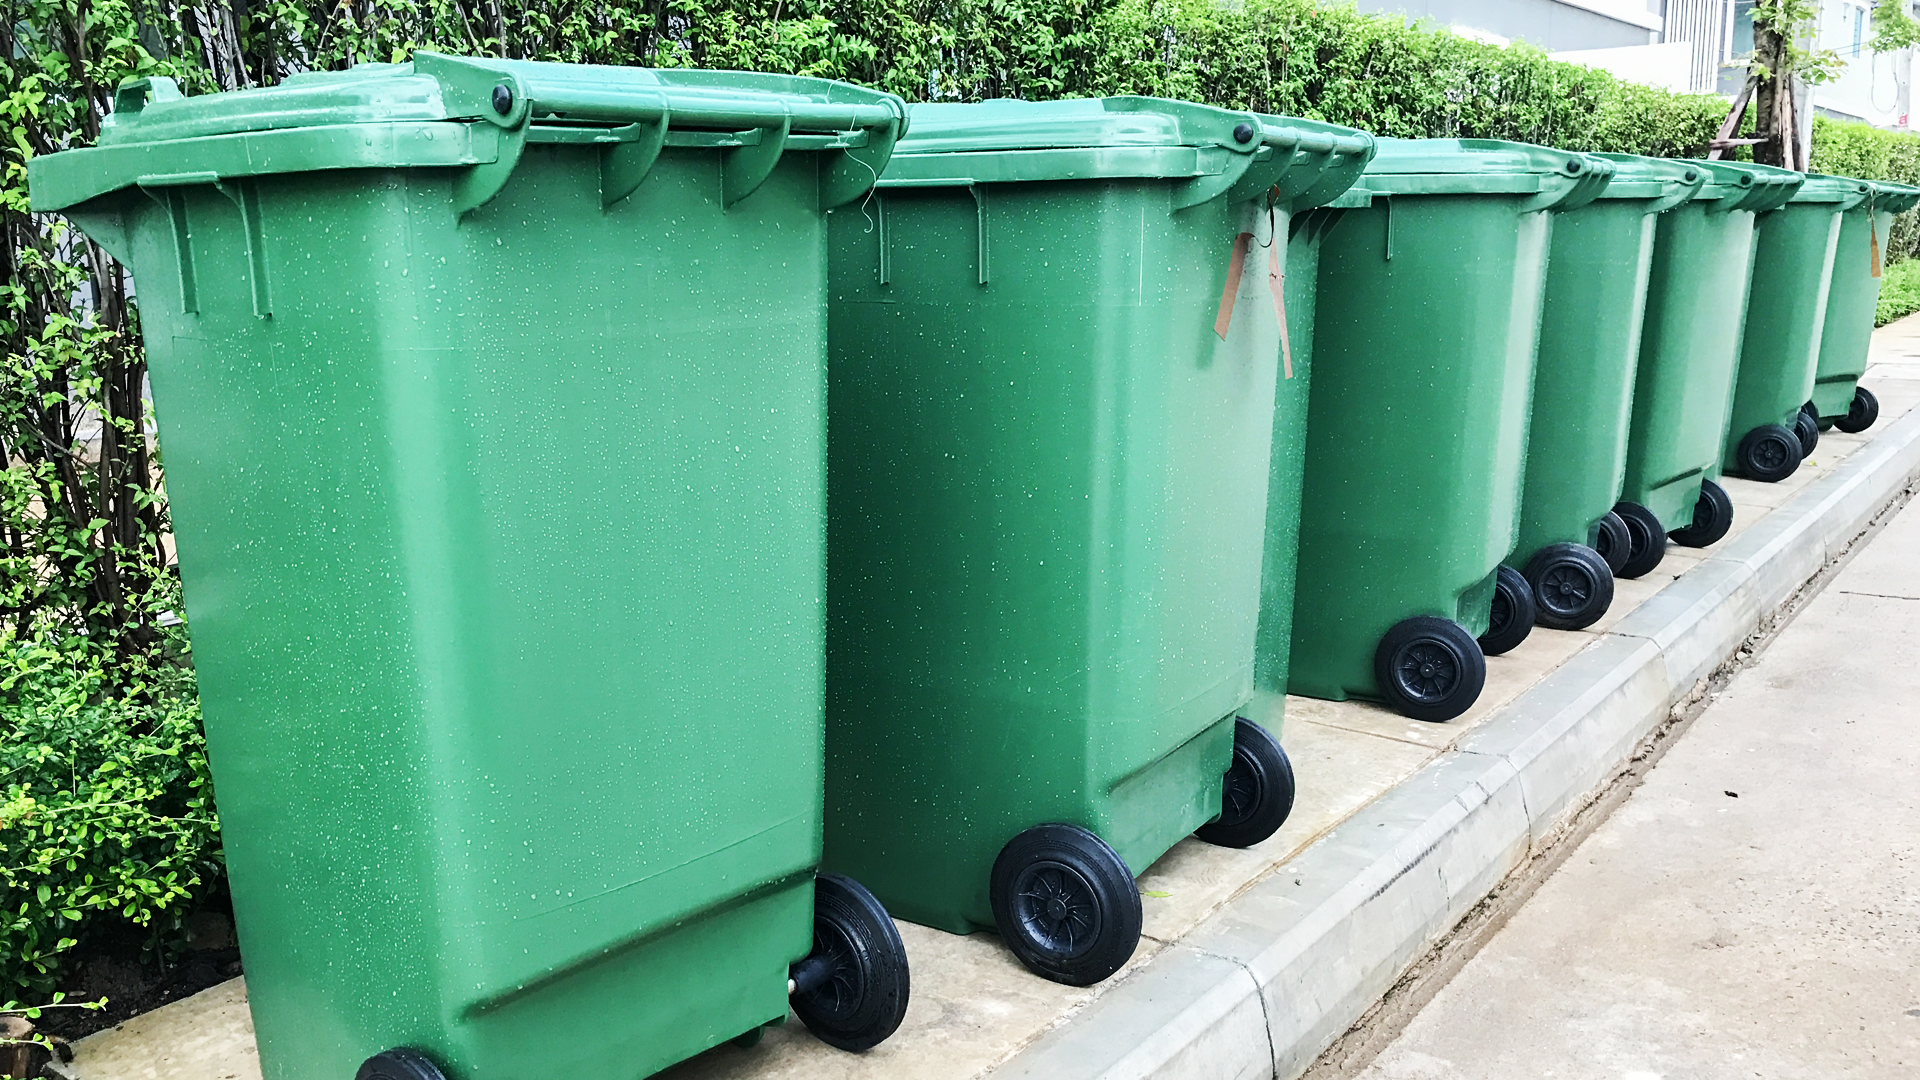 Curbside Recycling: What Can and Can't Be Recycled